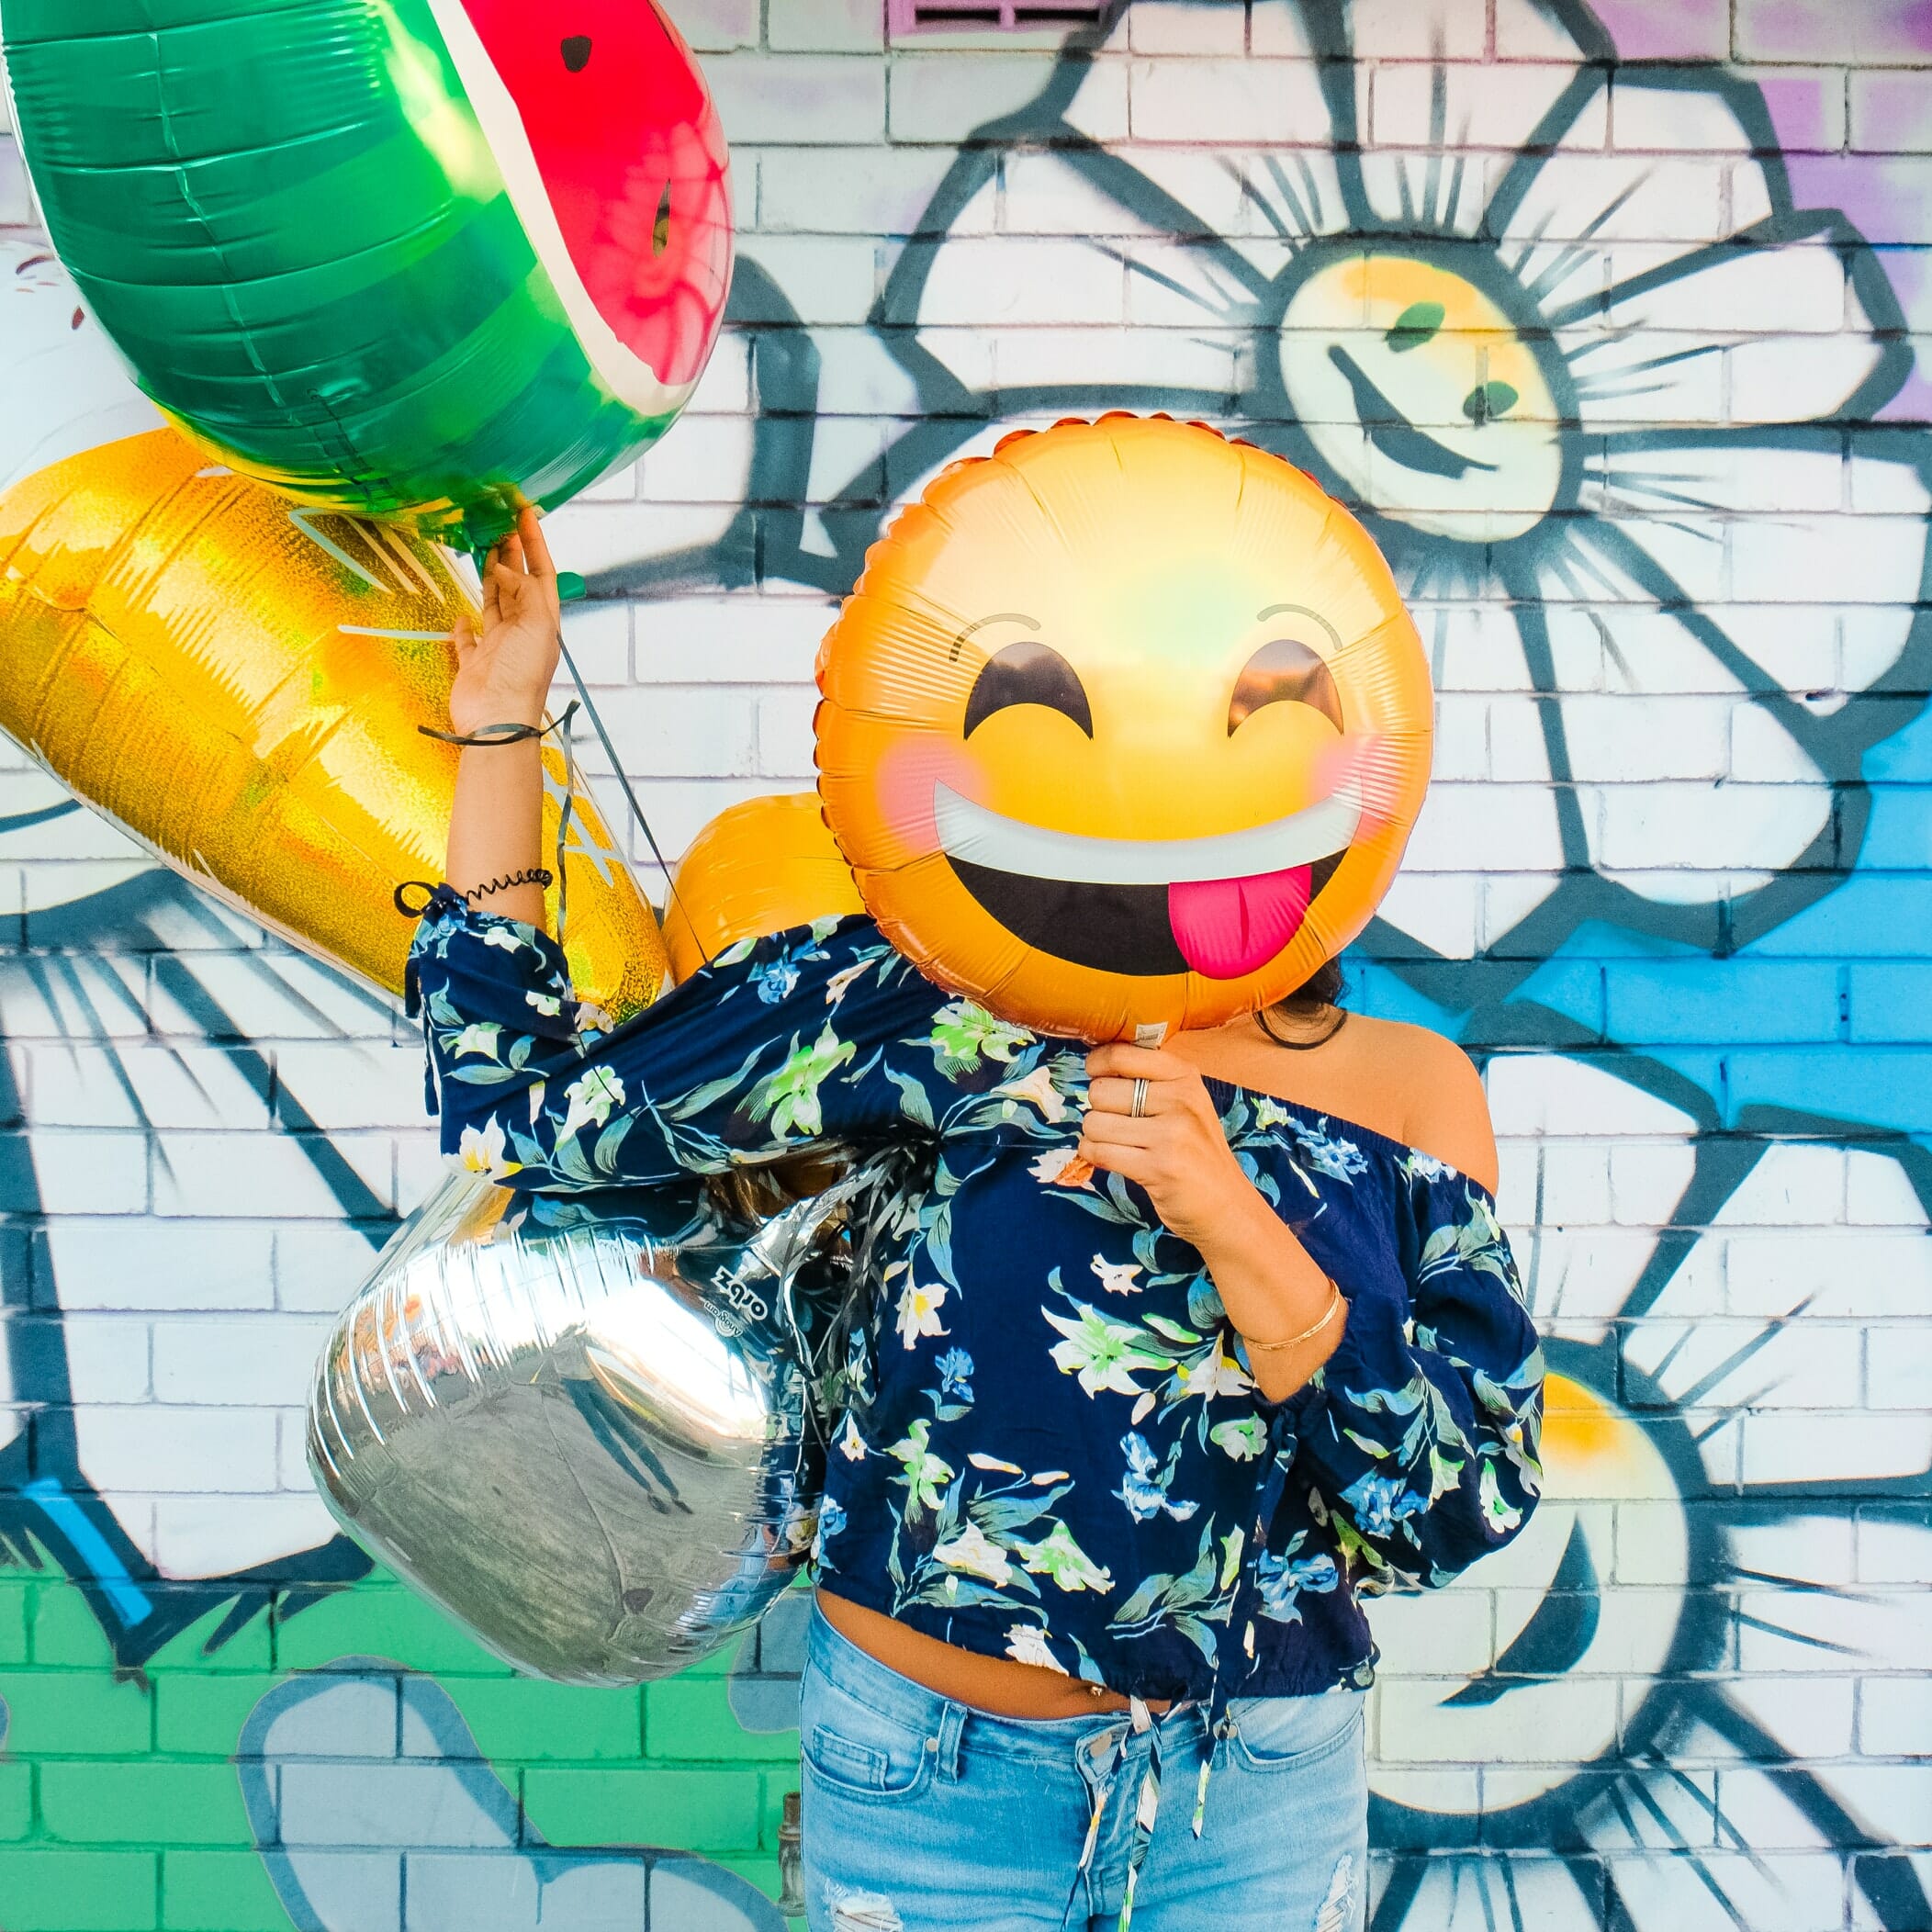 |Emoji have become part of how we communicate in a digital world. What is the history of emoji and how did we end up with these colourful symbols?